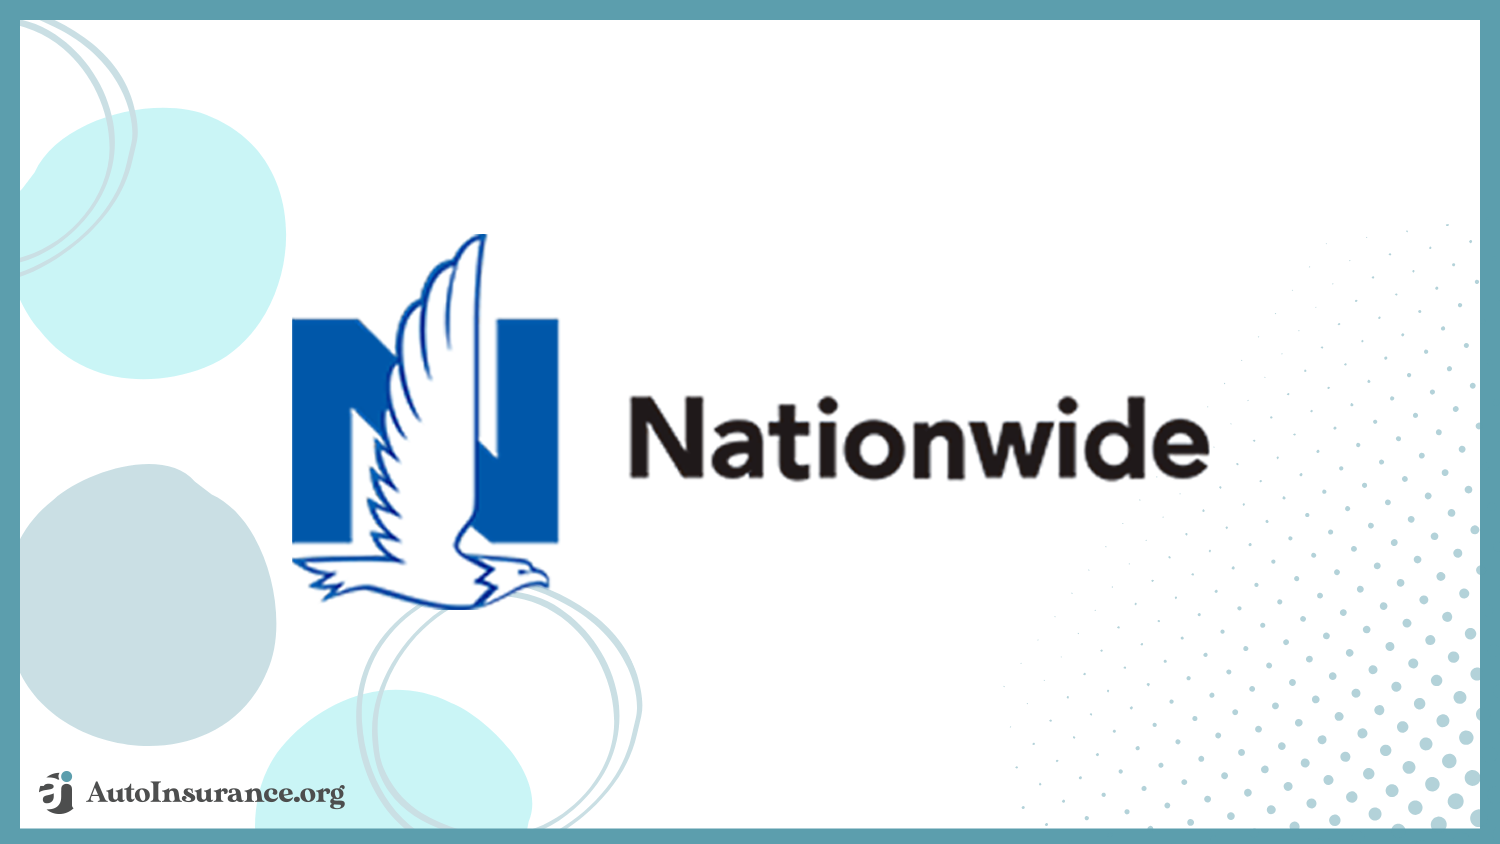 Nationwide: Best Auto Insurance Companies for Drivers With Bad Credit